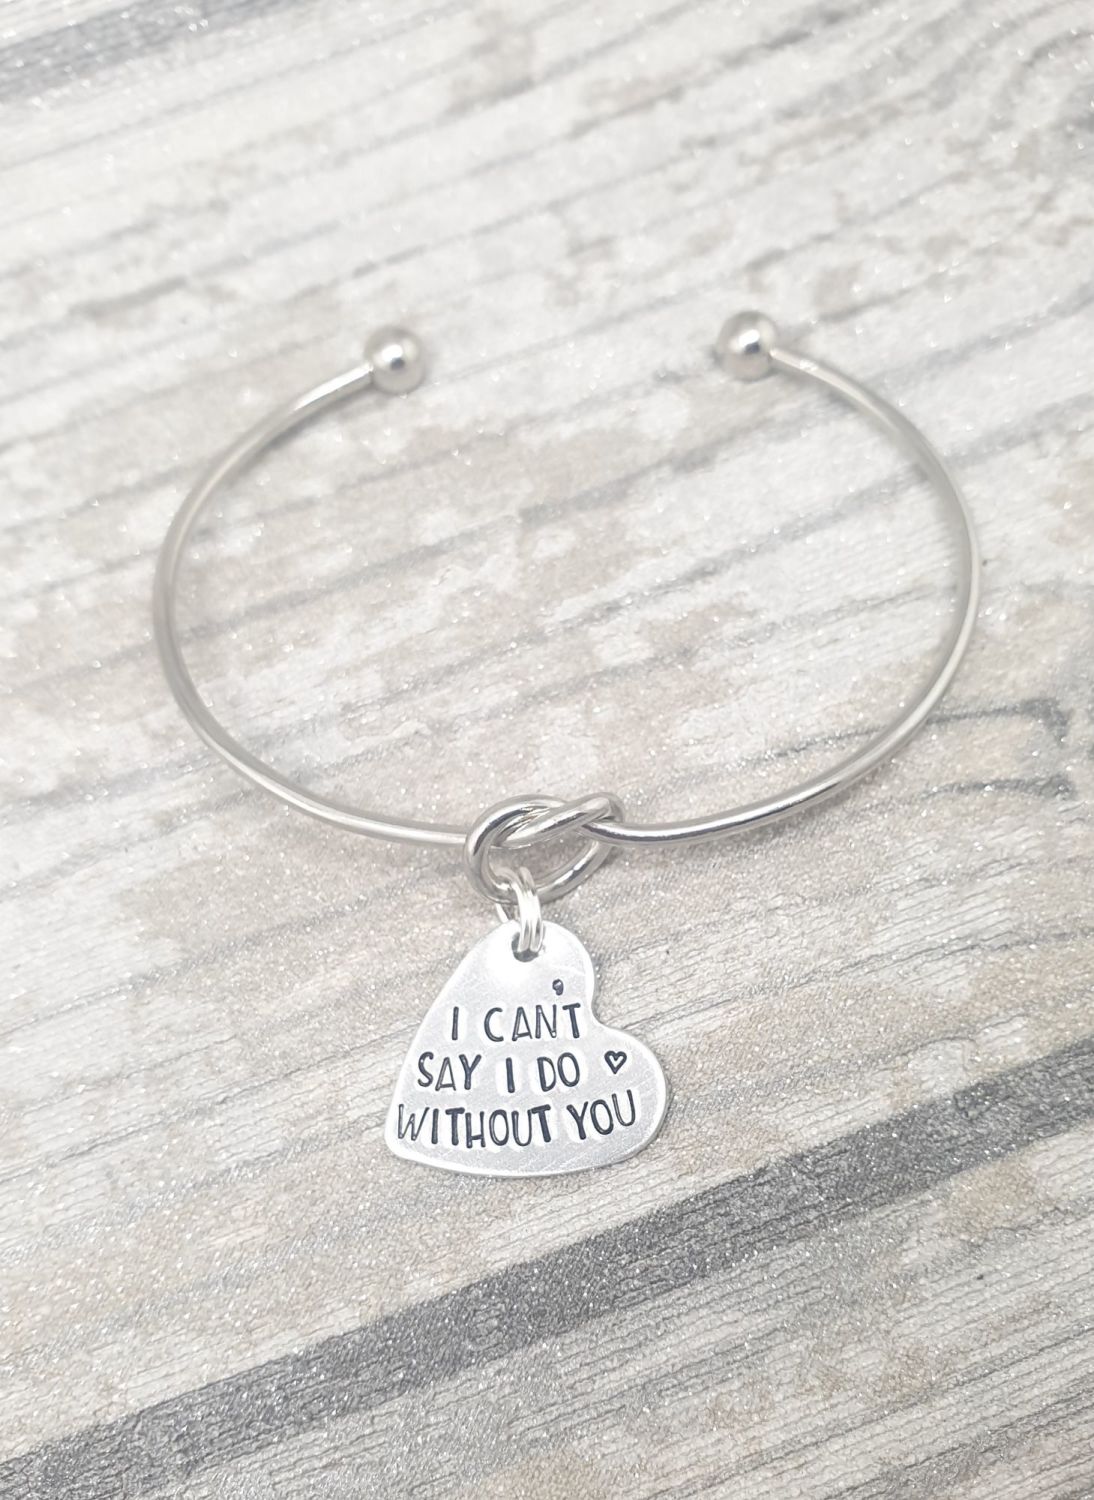 I can't say I Do without you - Knot Bangle